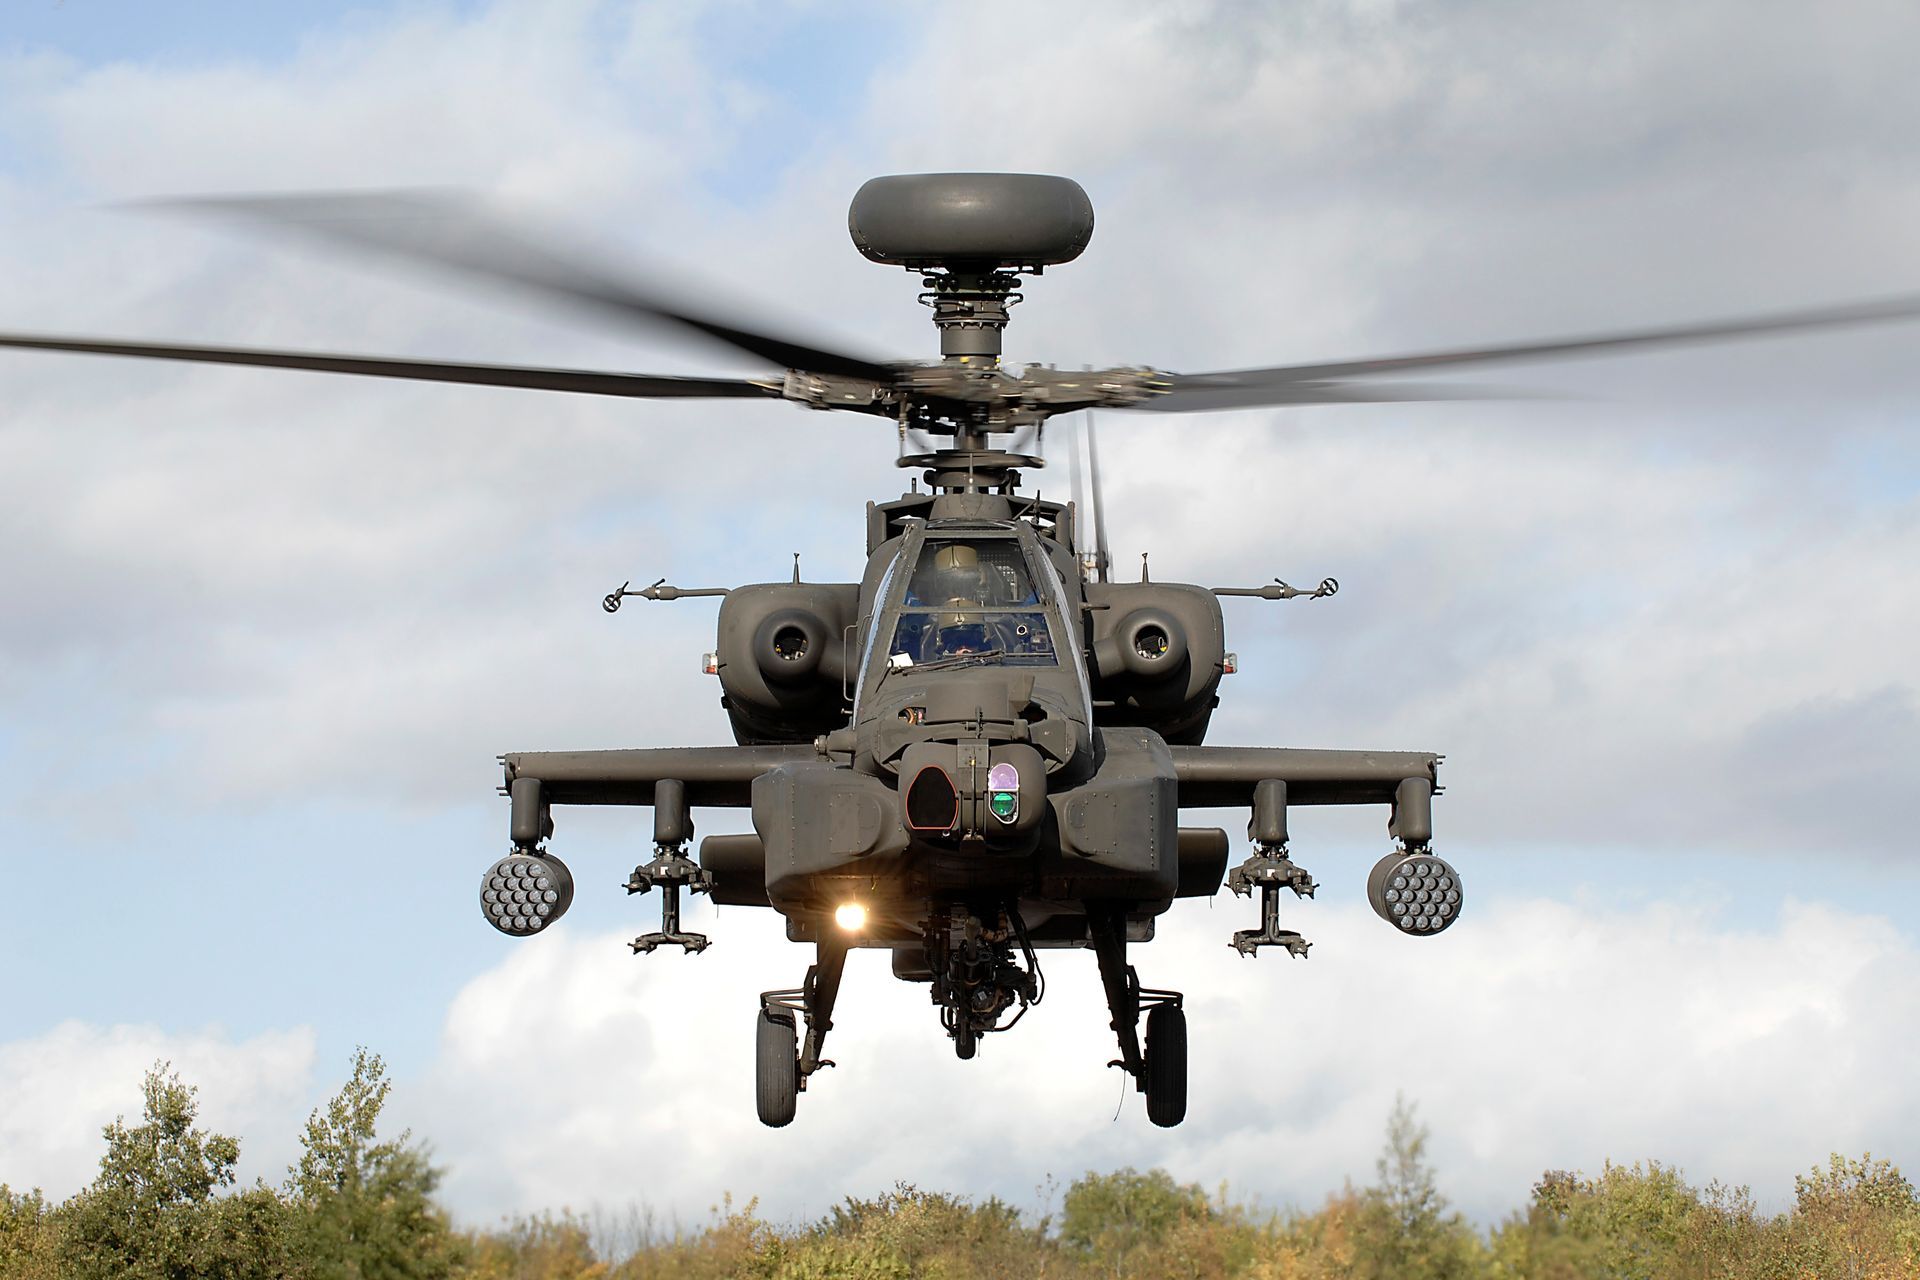 Hughes/McDonnell Douglas AH-64 Apache helicopter.